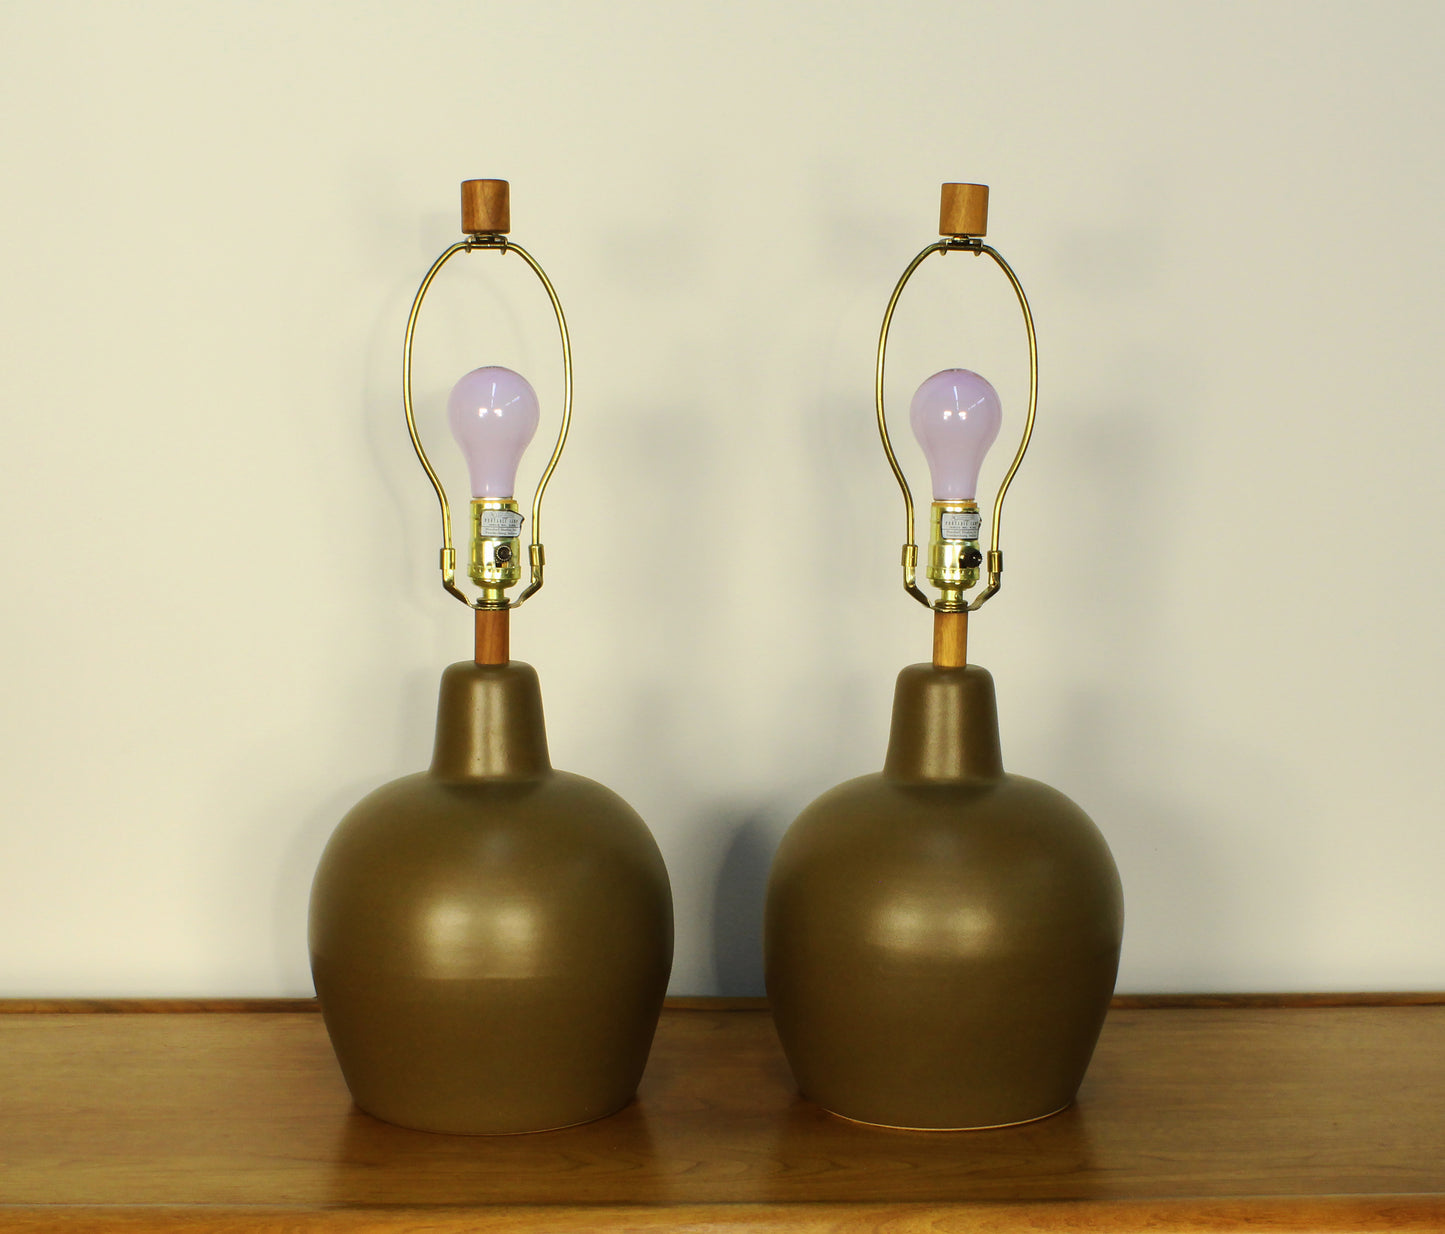 Modernist Lamps by Martz Marshall Studios - A Pair